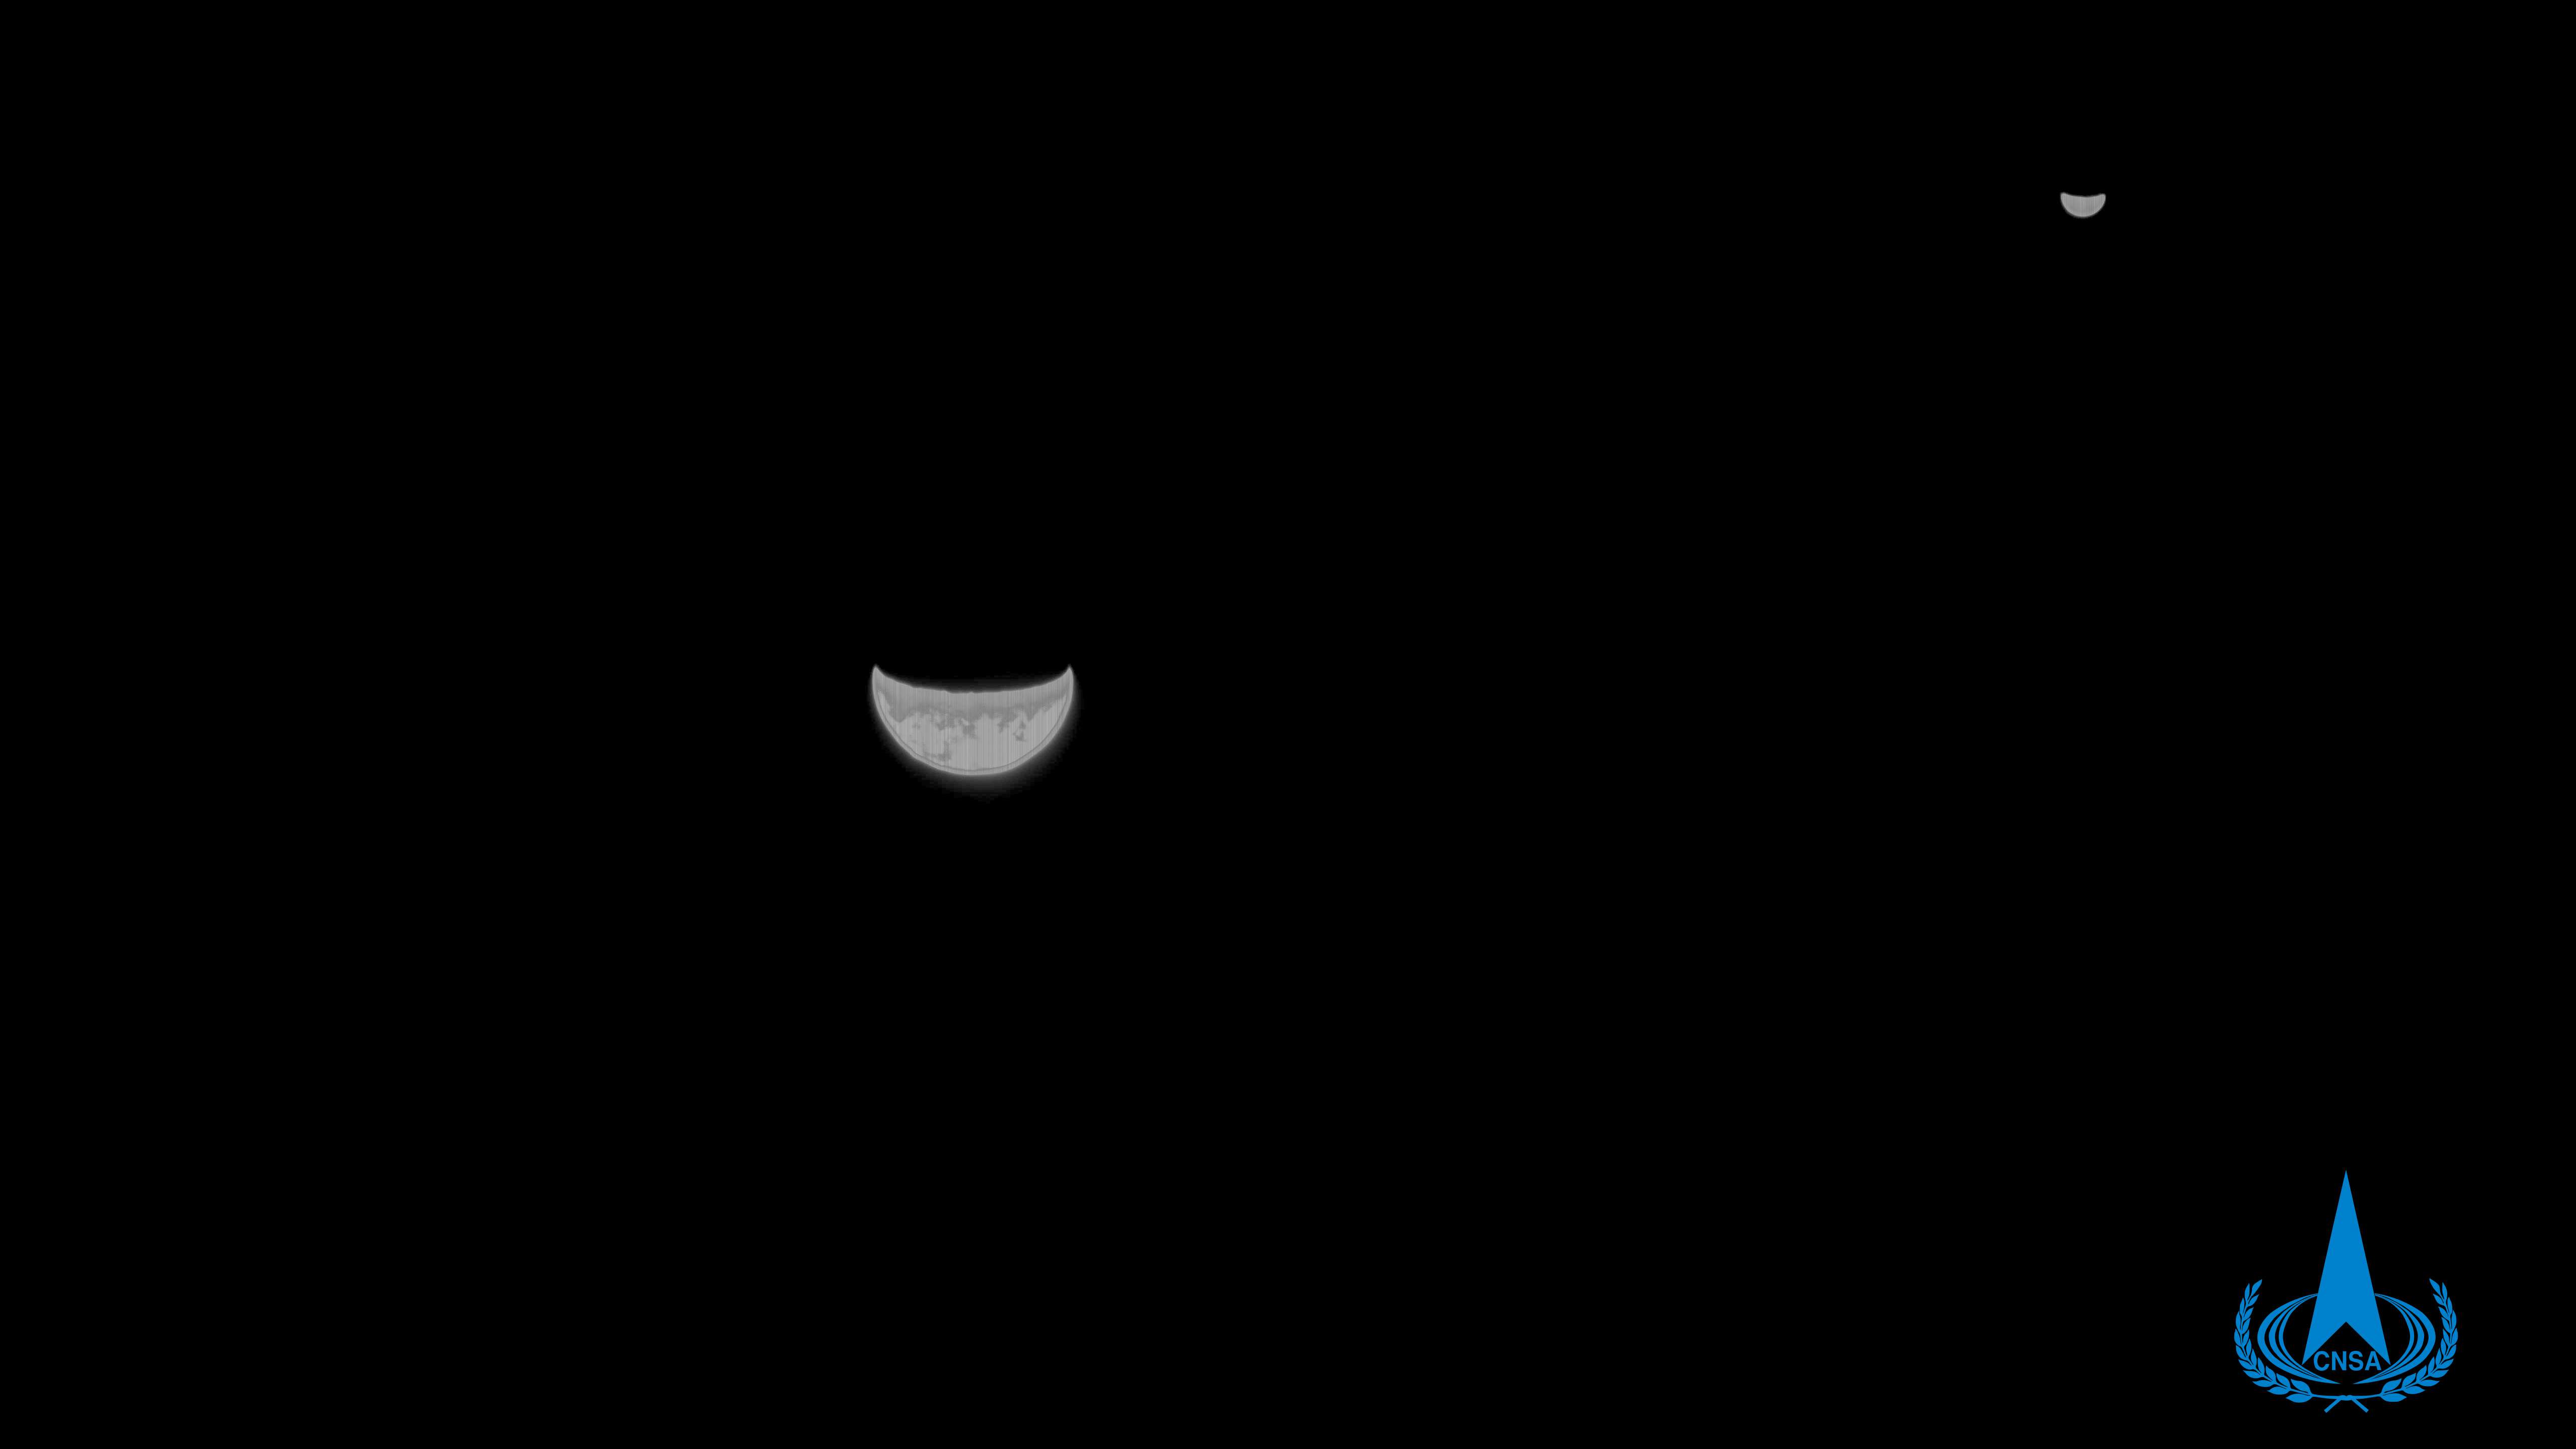 A photo of Earth and moon captured by China's Tianwen-1 probe at a distance of 1.2 million kilometers away. /China National Space Agency